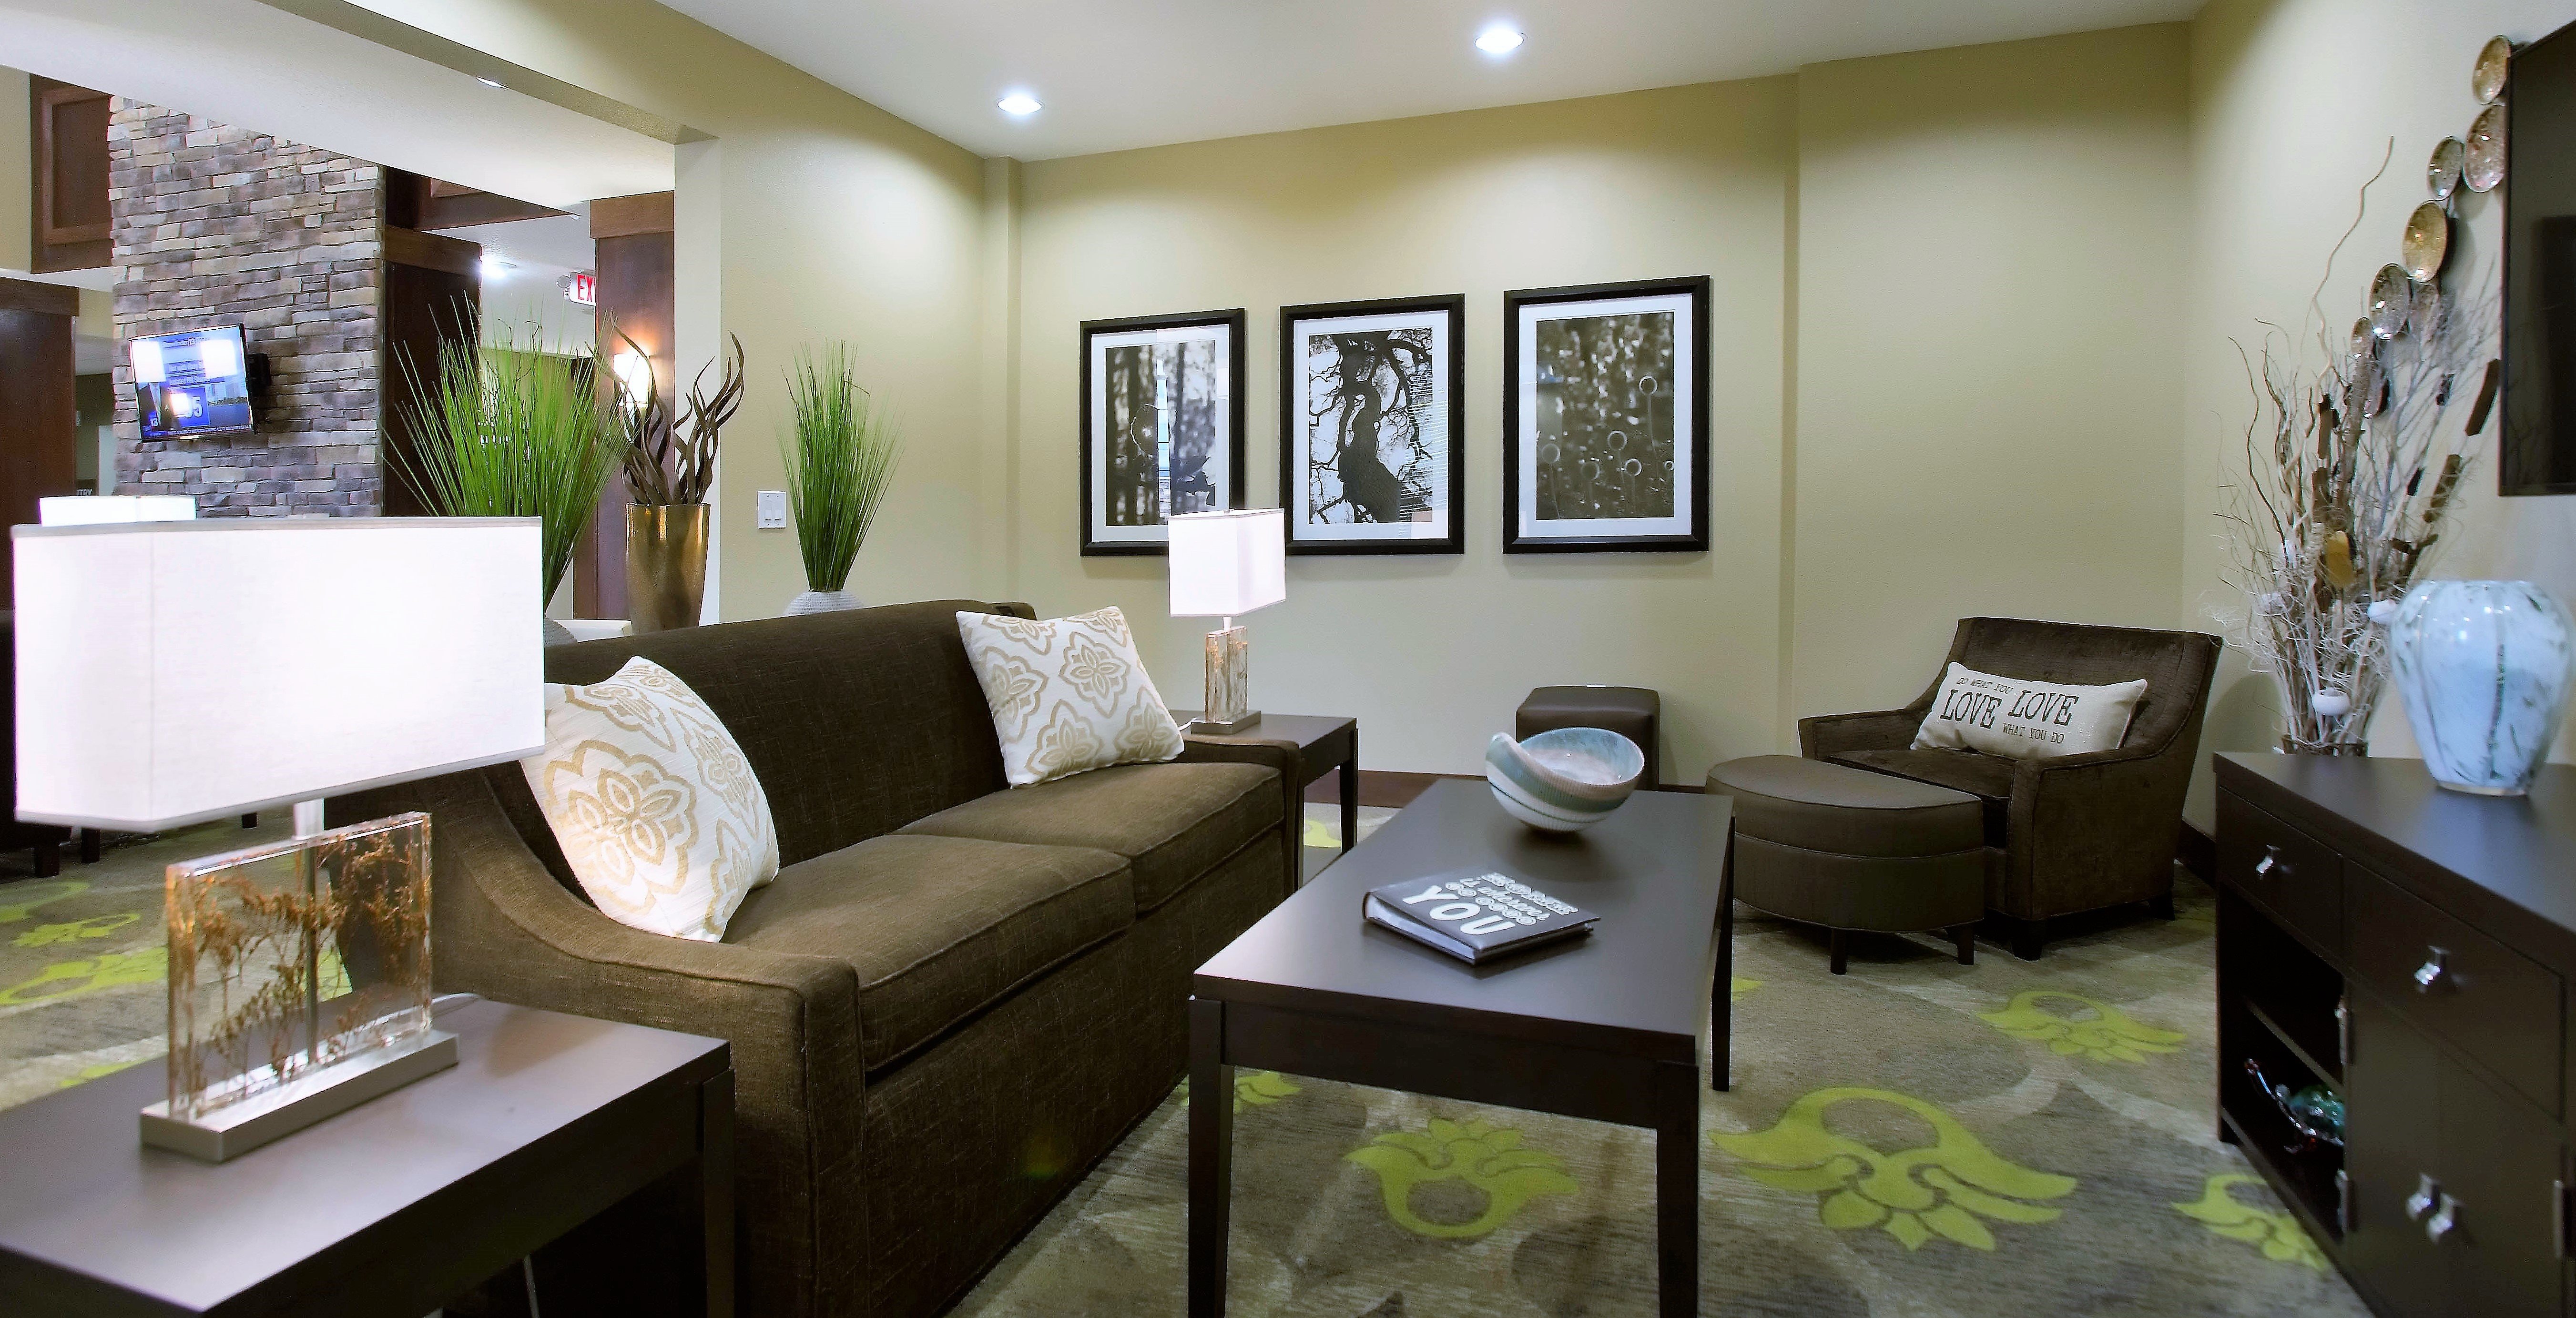 Settle in and stay awhile at Staybridge Suites Orlando at SeaWorld